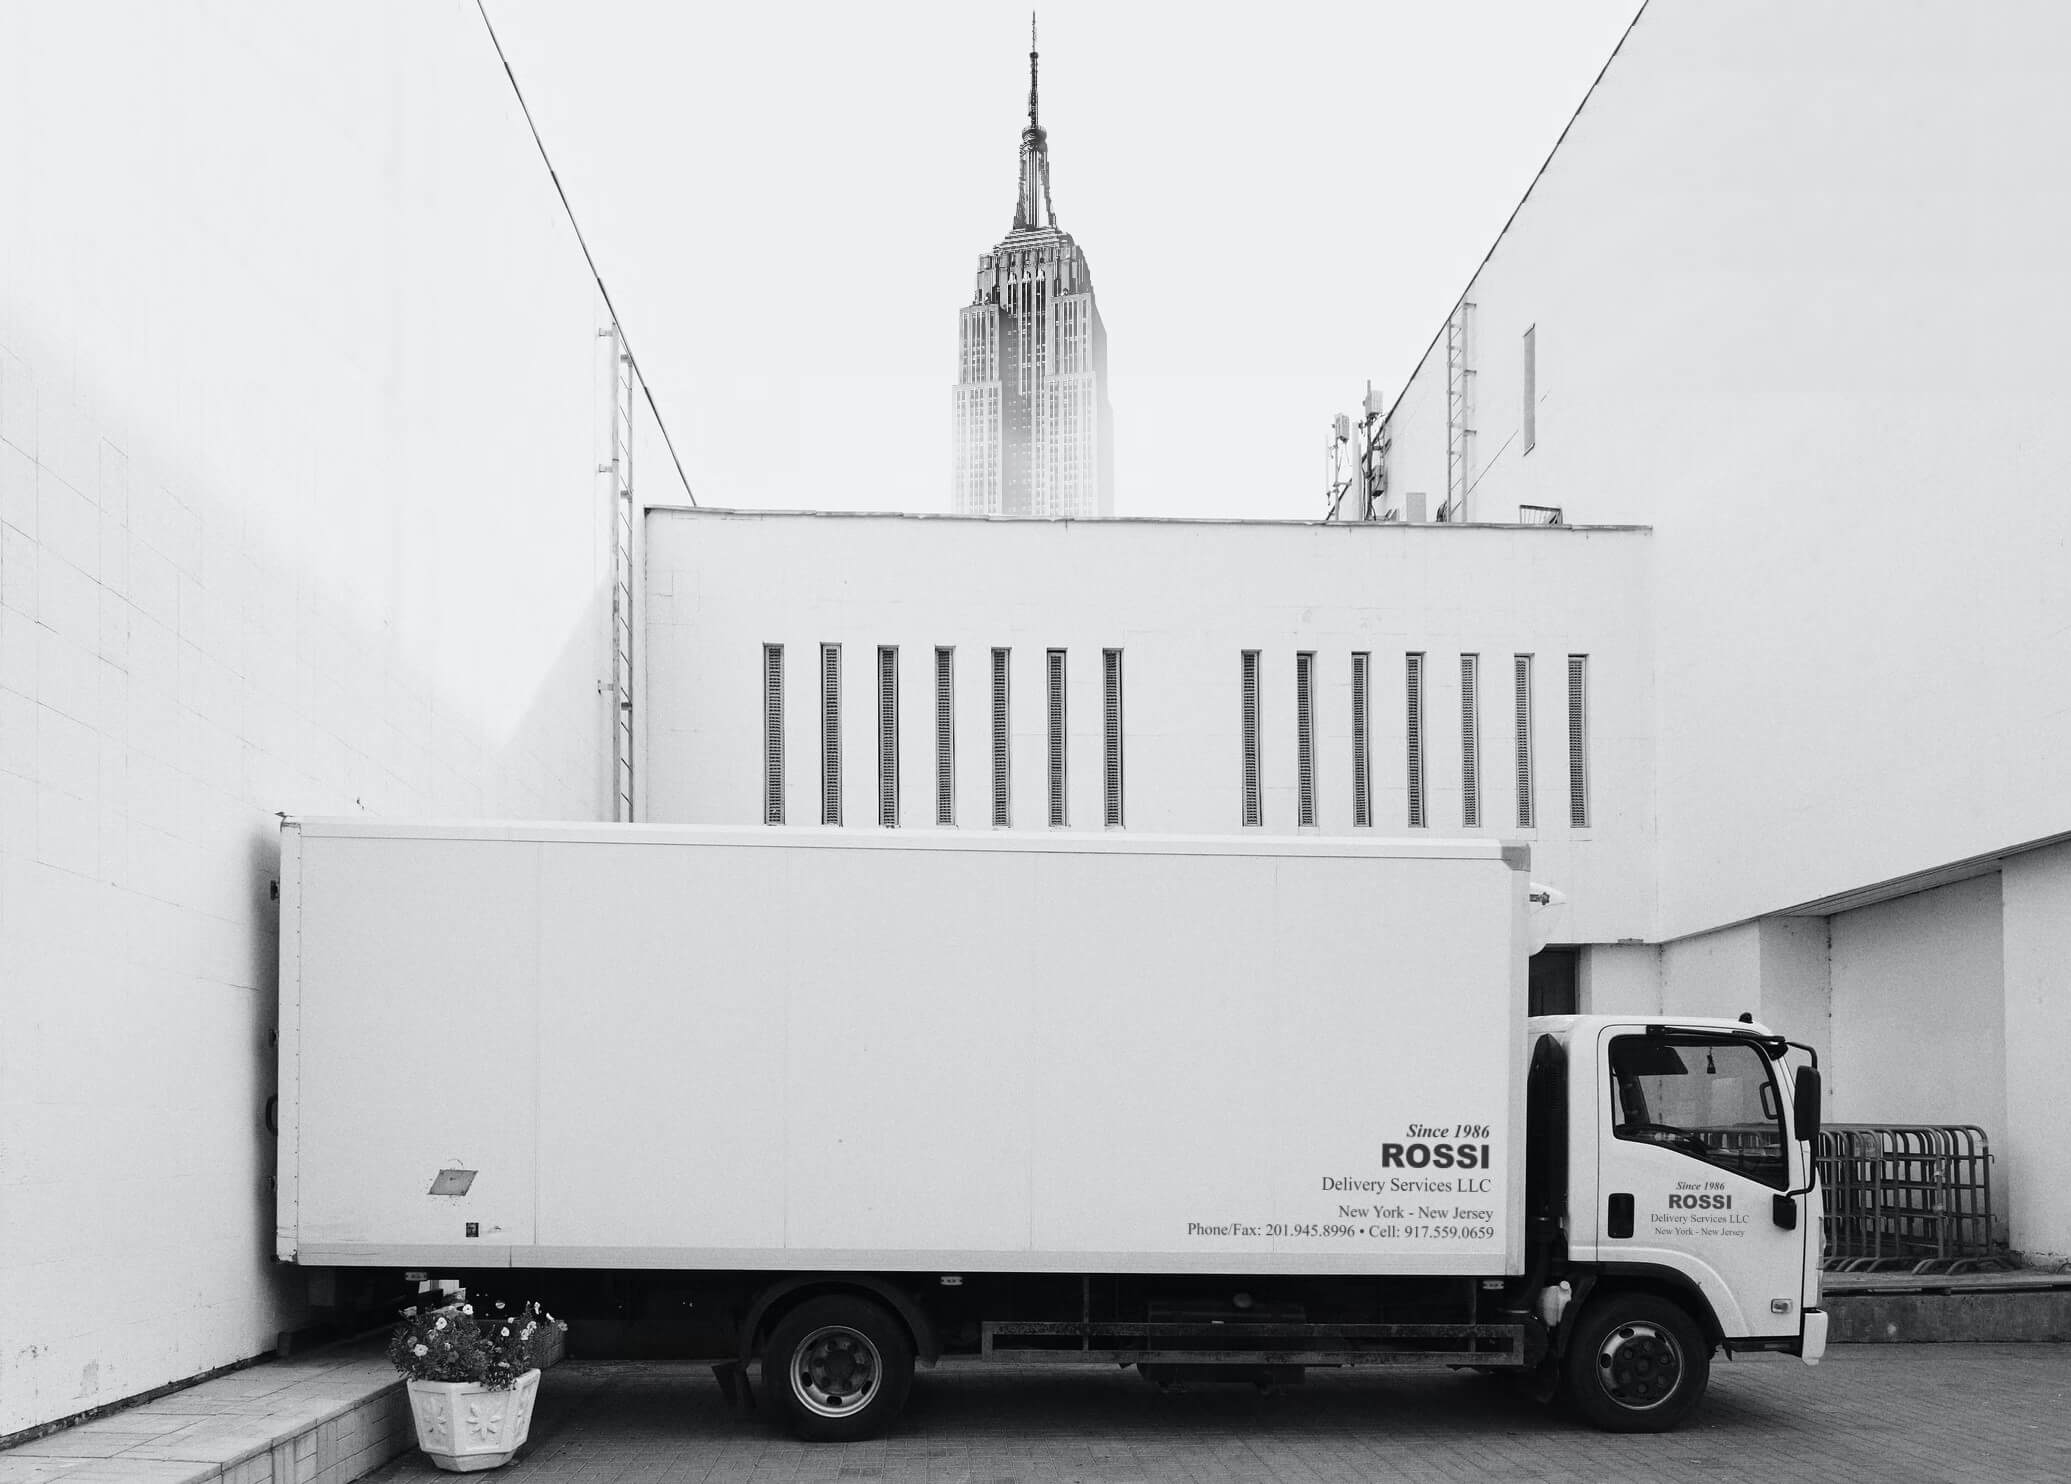 Rossi Delivery Services: Freight and Logistics NY NY Events Stage Shows